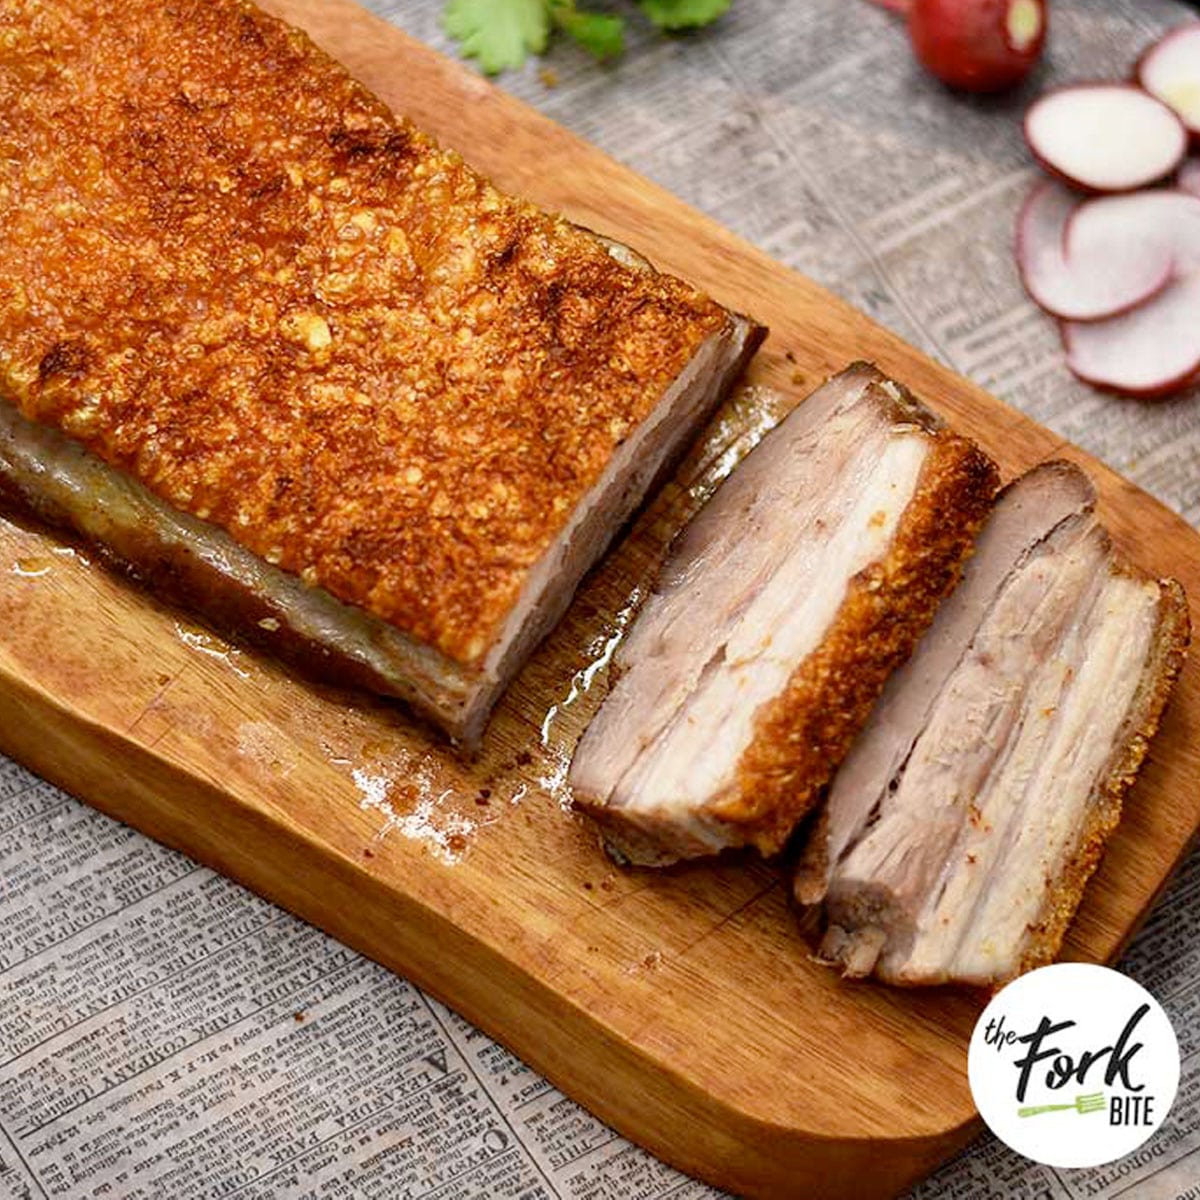 The oven method is one of the most optimal ways to maintain the crispiness of the skin and the tenderness of the meat without making it rubbery or drying it out.